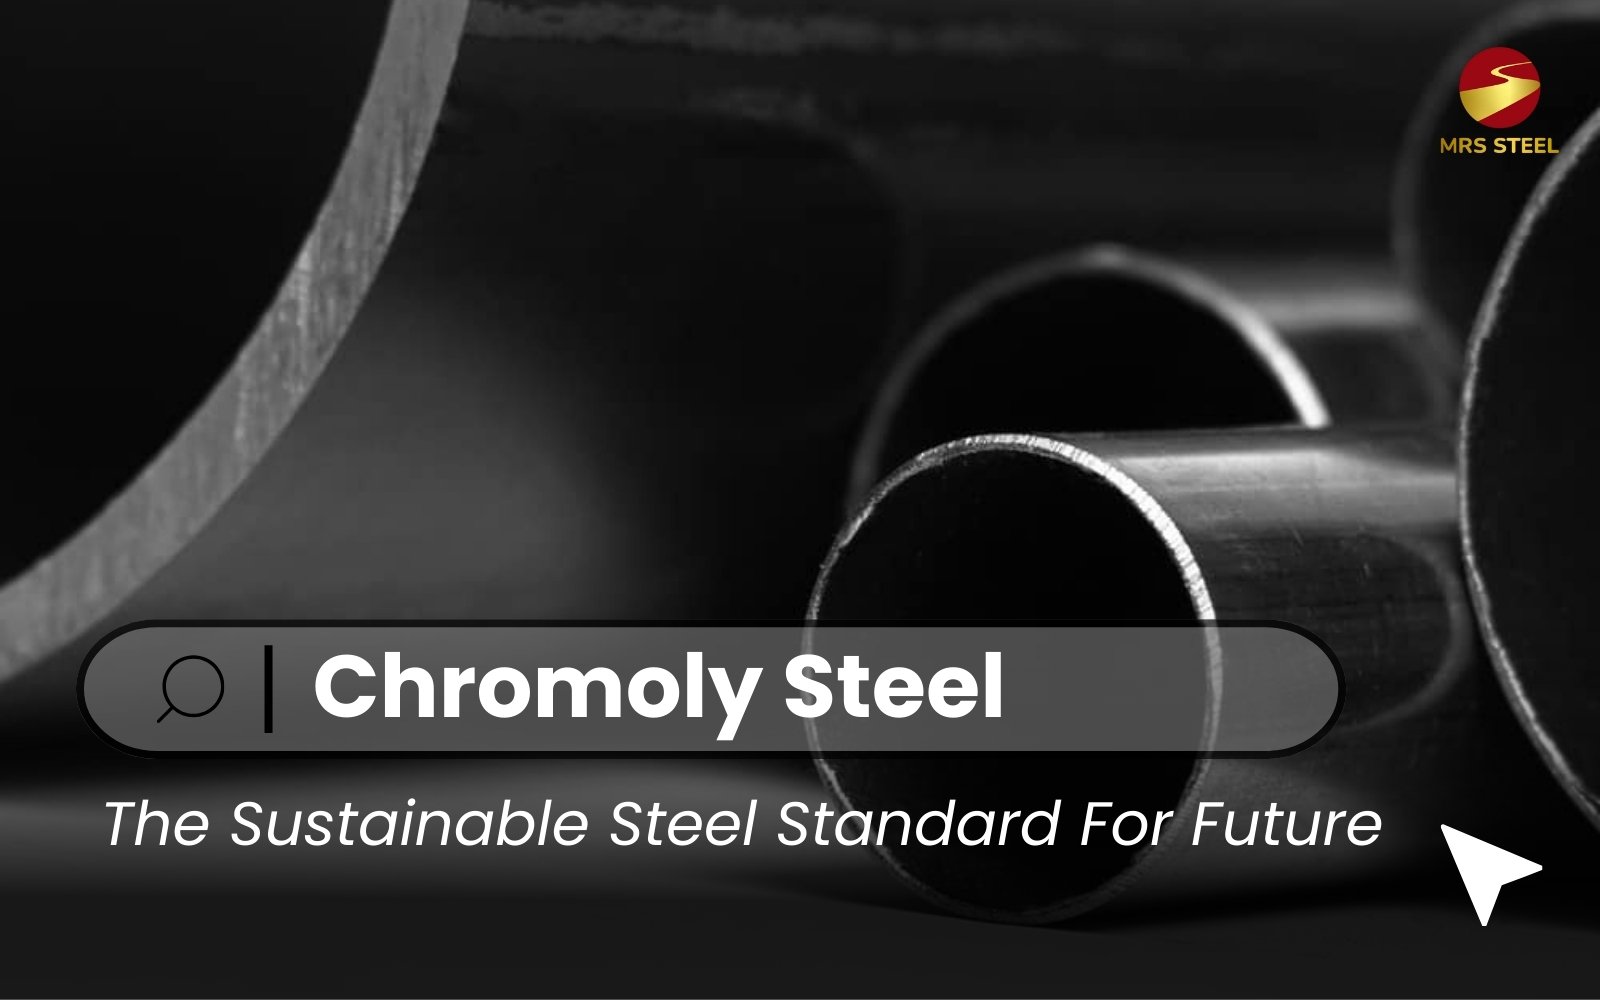 Overview Chromoly Steel - The Sustainable Steel Standard For Future